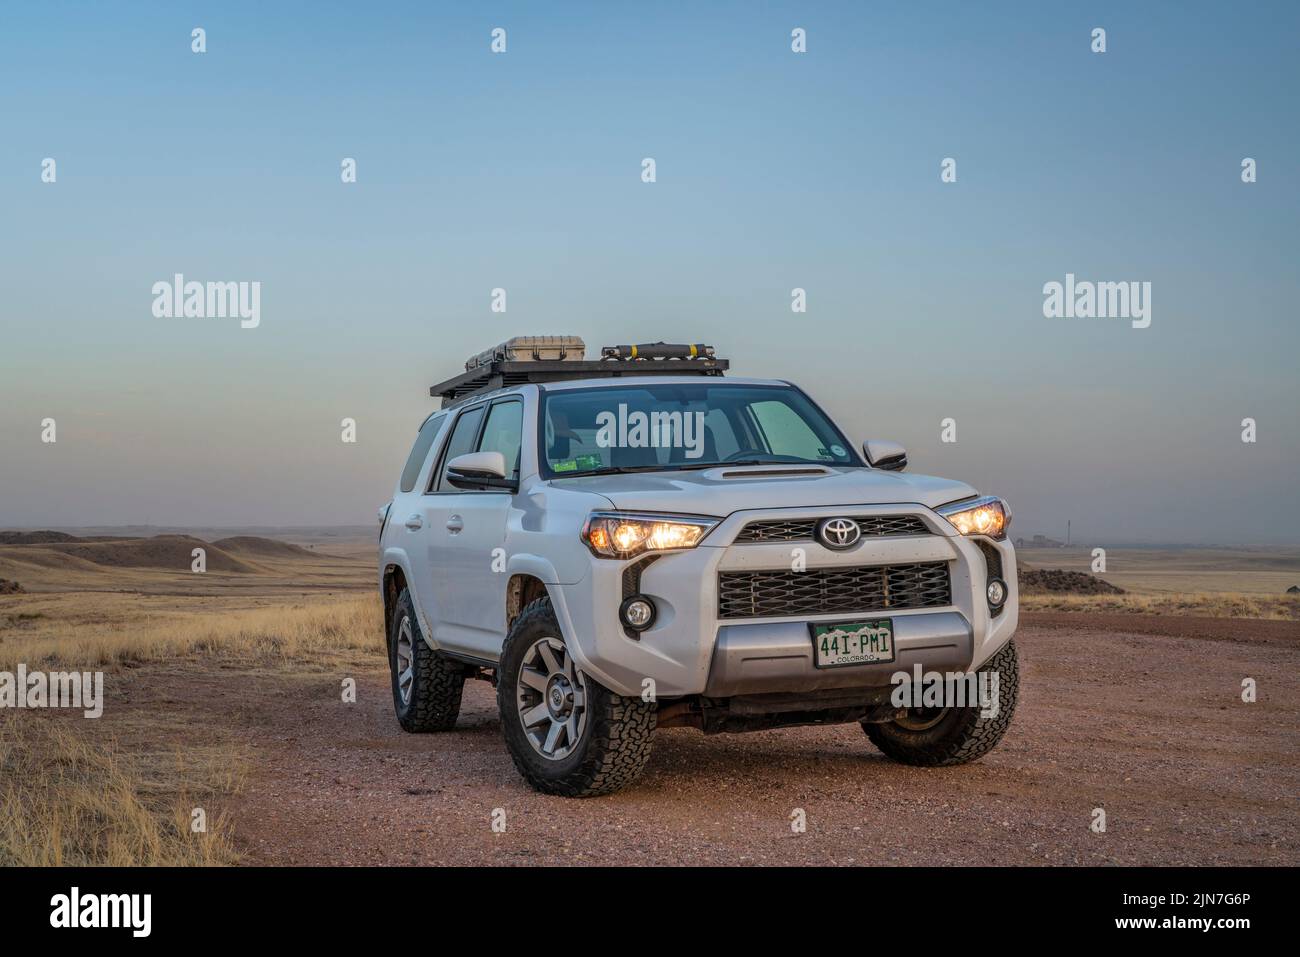 Fort Collins, CO, USA - April 16, 2022: Toyota 4Runner SUV at dusk parked at a trailhead in Soapstone Prairie Natural Area in Colorado foothills. Stock Photo